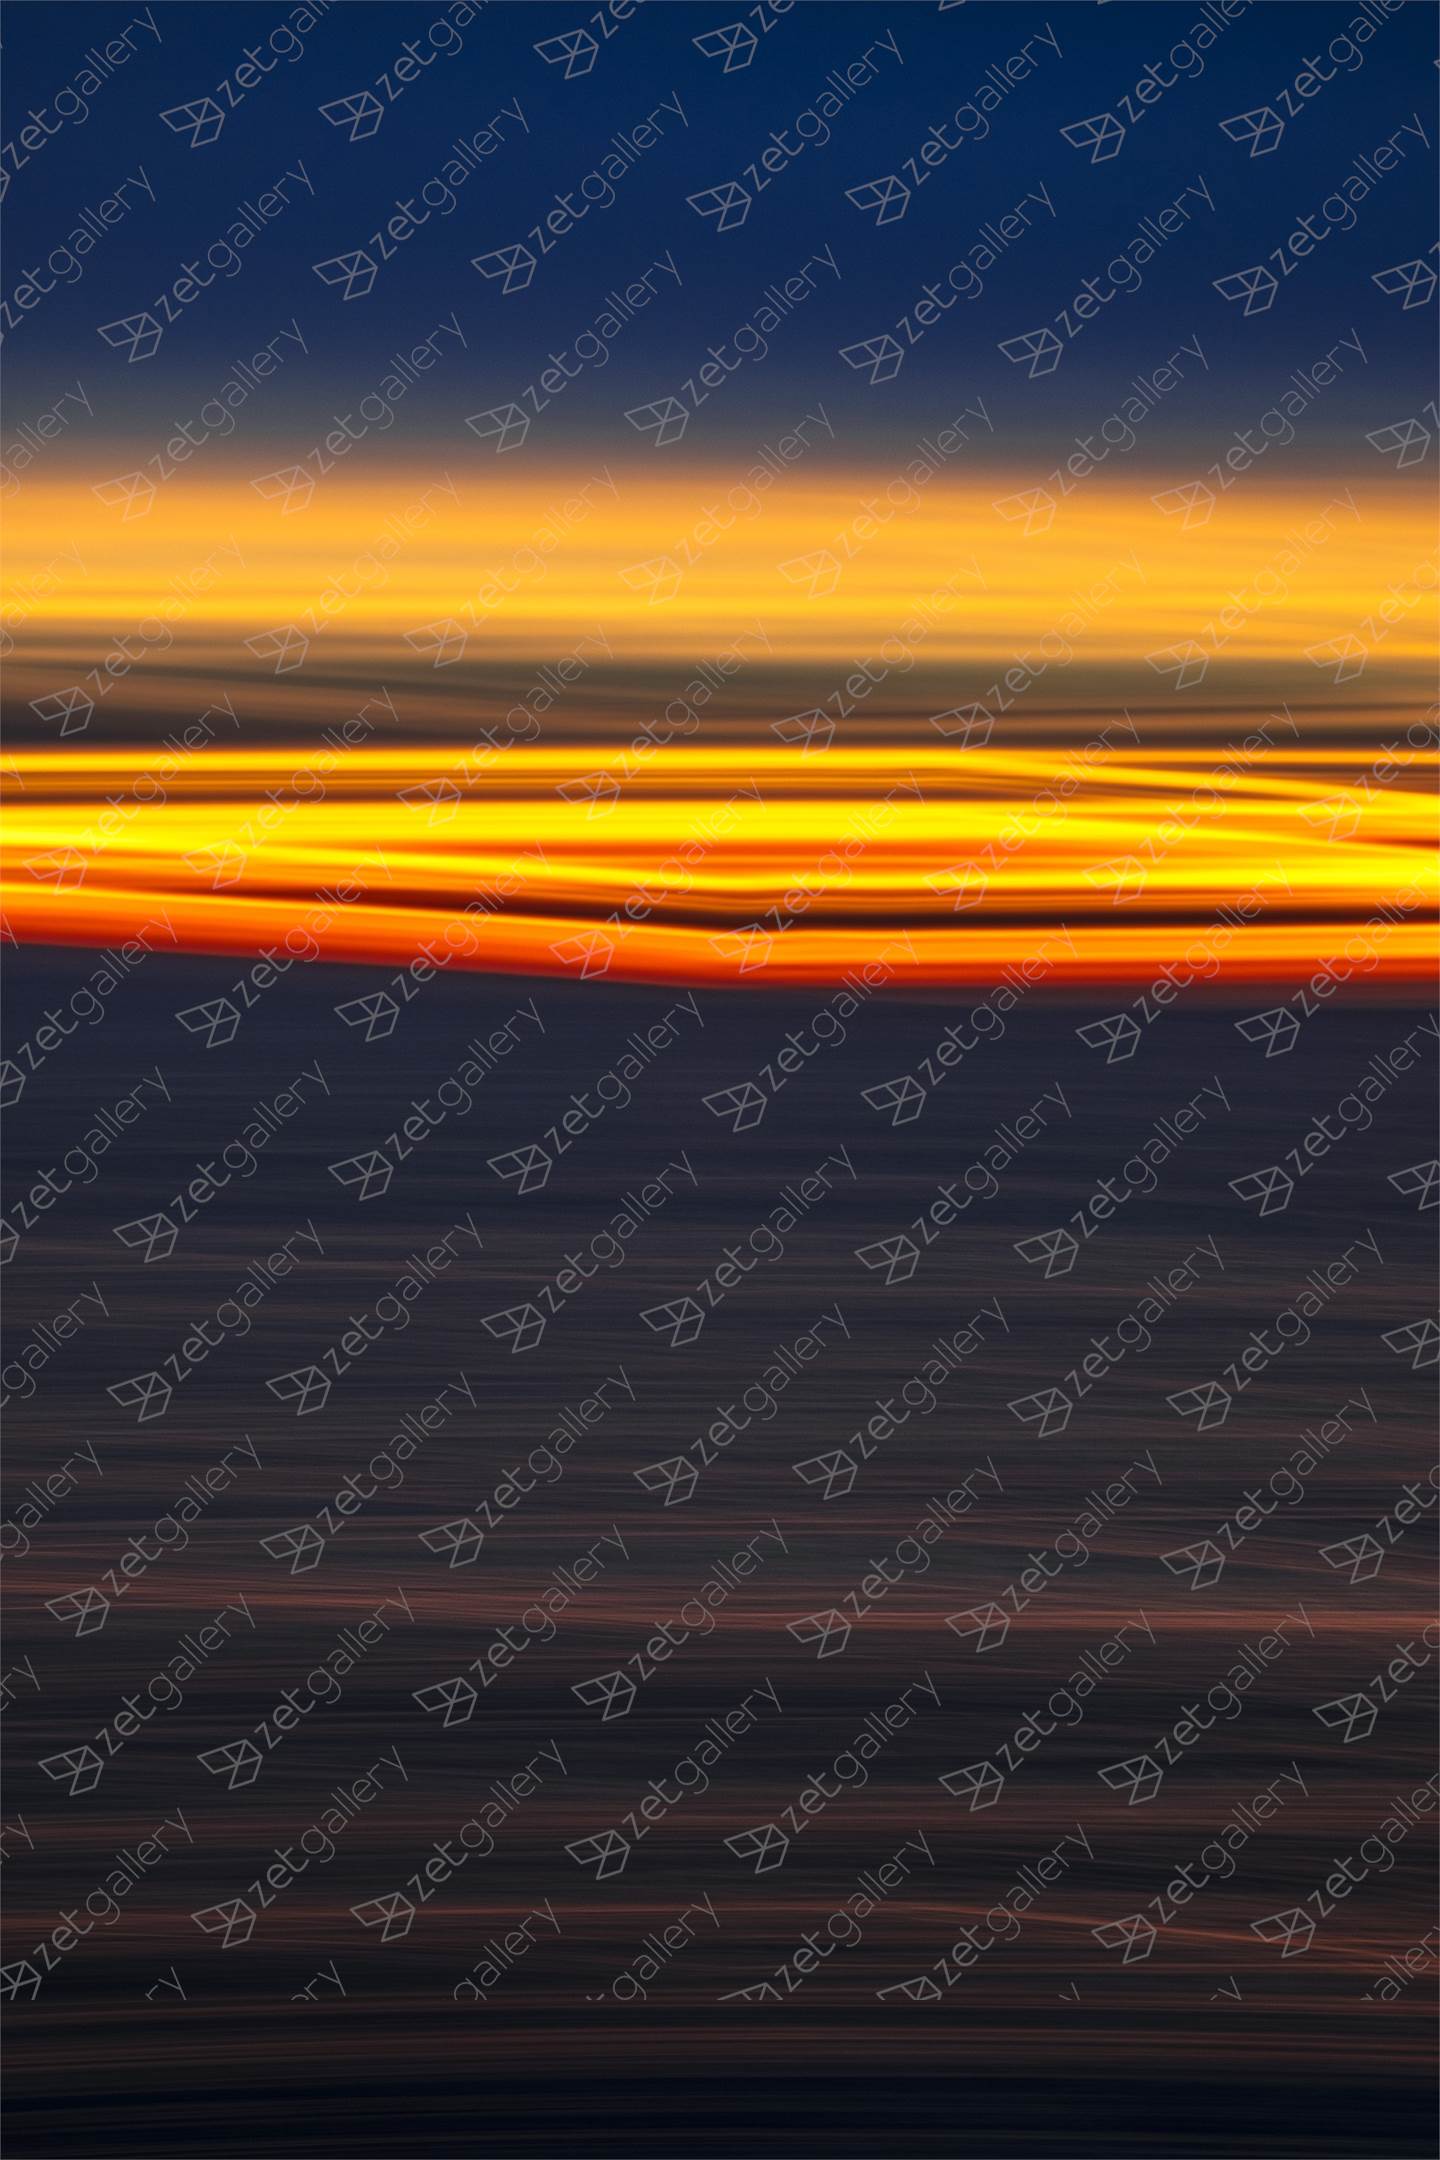 ABSTRACT SUNRISE II, Large Edition 1 of 5, original Abstract Digital Photography by Benjamin Lurie